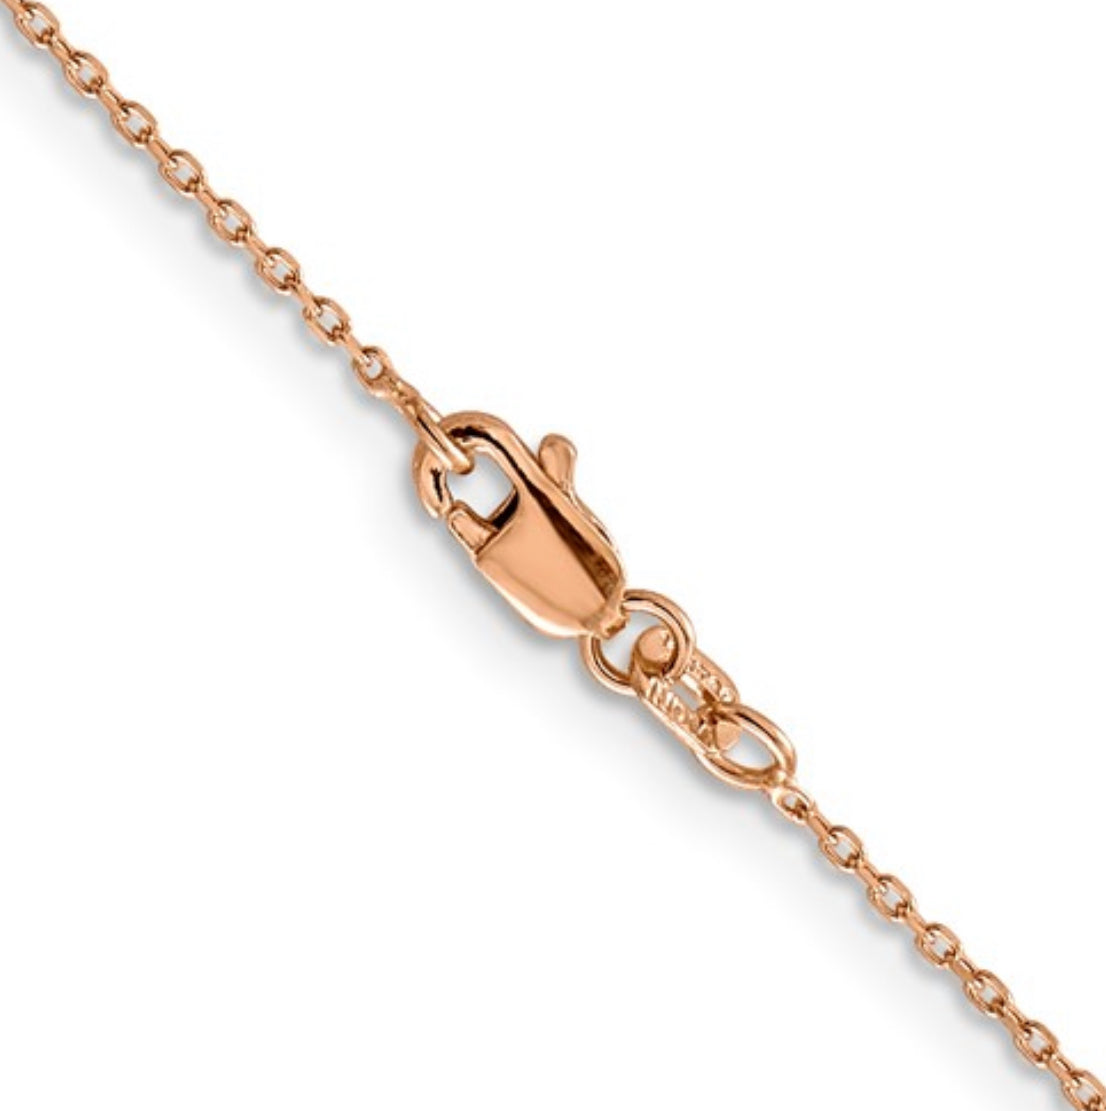 14K Rose Gold Cable Chain with Lobster Clasp - 1.65 mm - Various Length